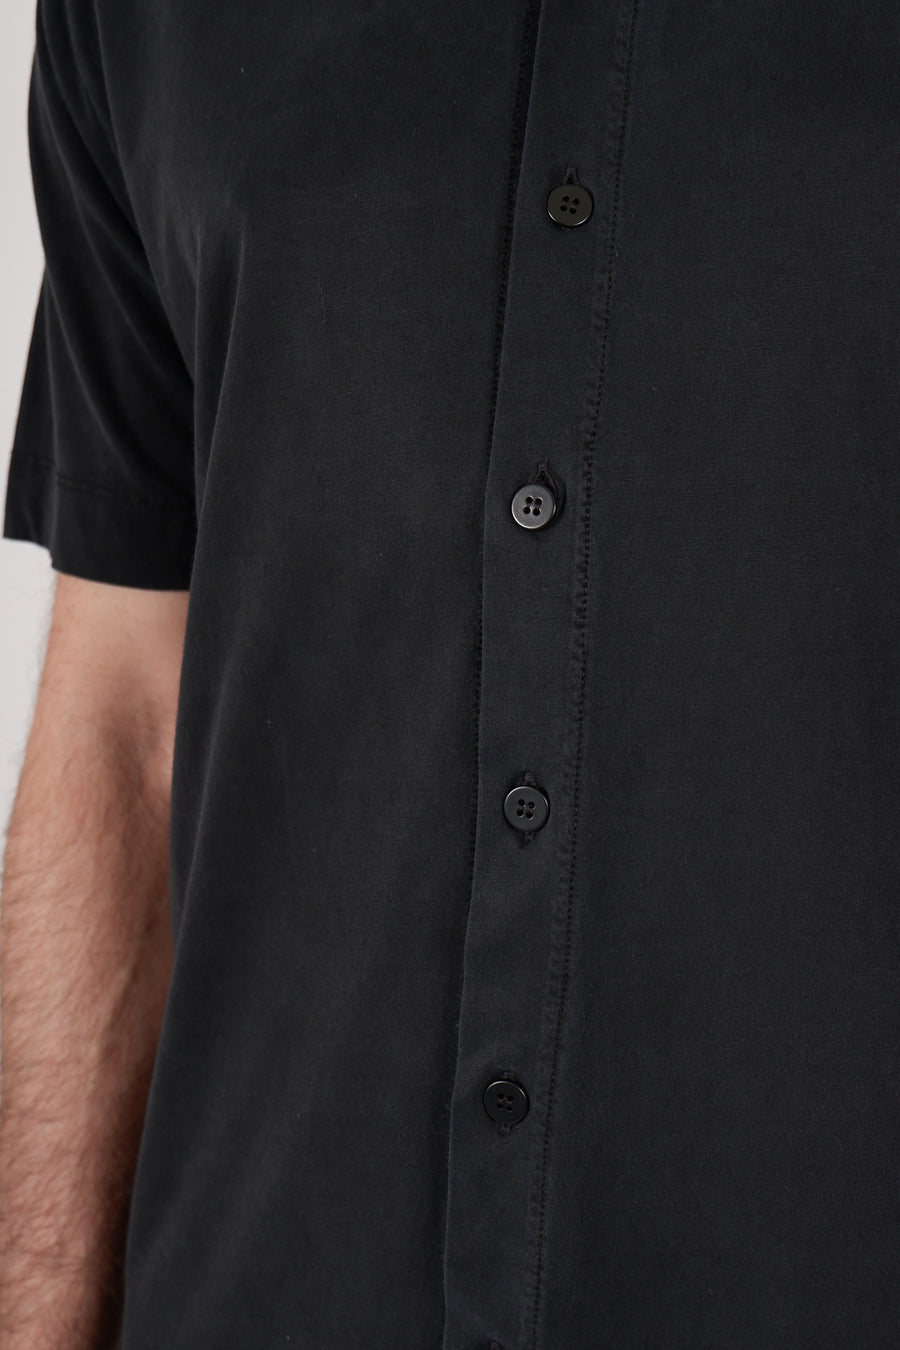 Buy the Daniele Fiesoli Cotton/Silk S/S Shirt in Black at Intro. Spend £50 for free UK delivery. Official stockists. We ship worldwide.